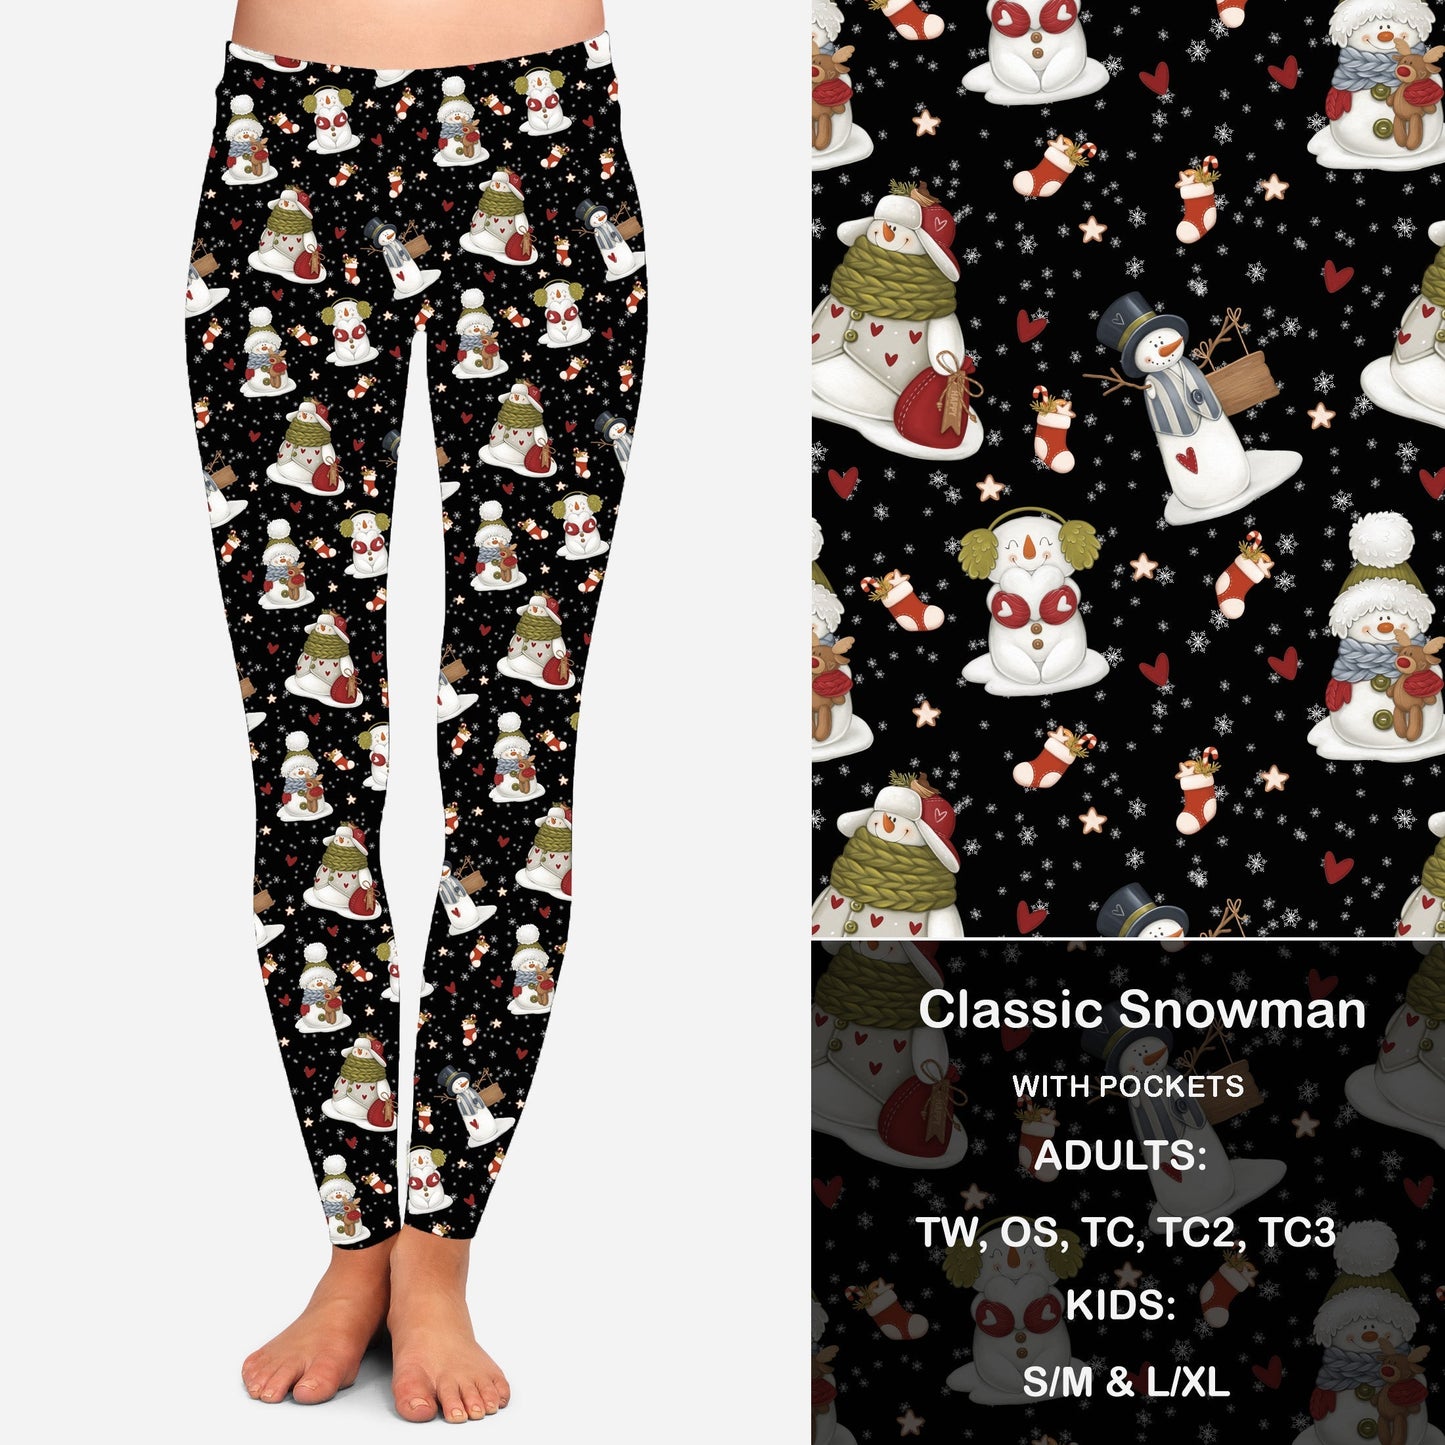 Classic Snowman Leggings with Pockets